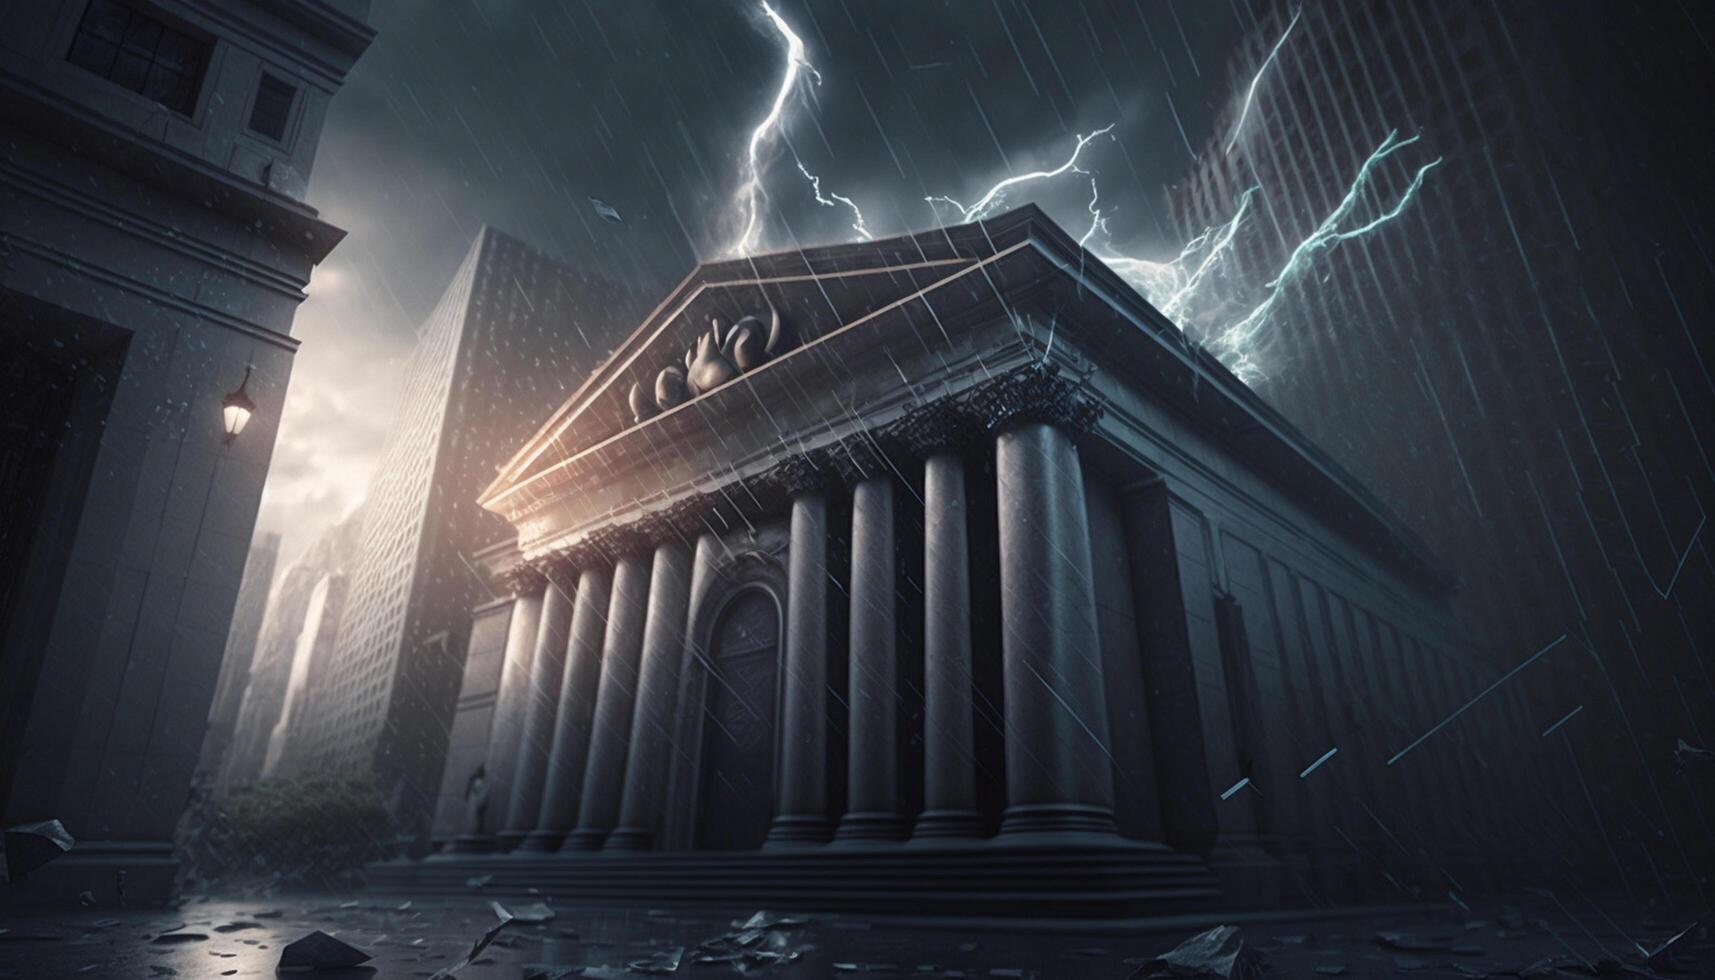 Stormy Apocalypse A Mystical Image of Wall Street Destroyed by a Financial Storm and Market Crash photo